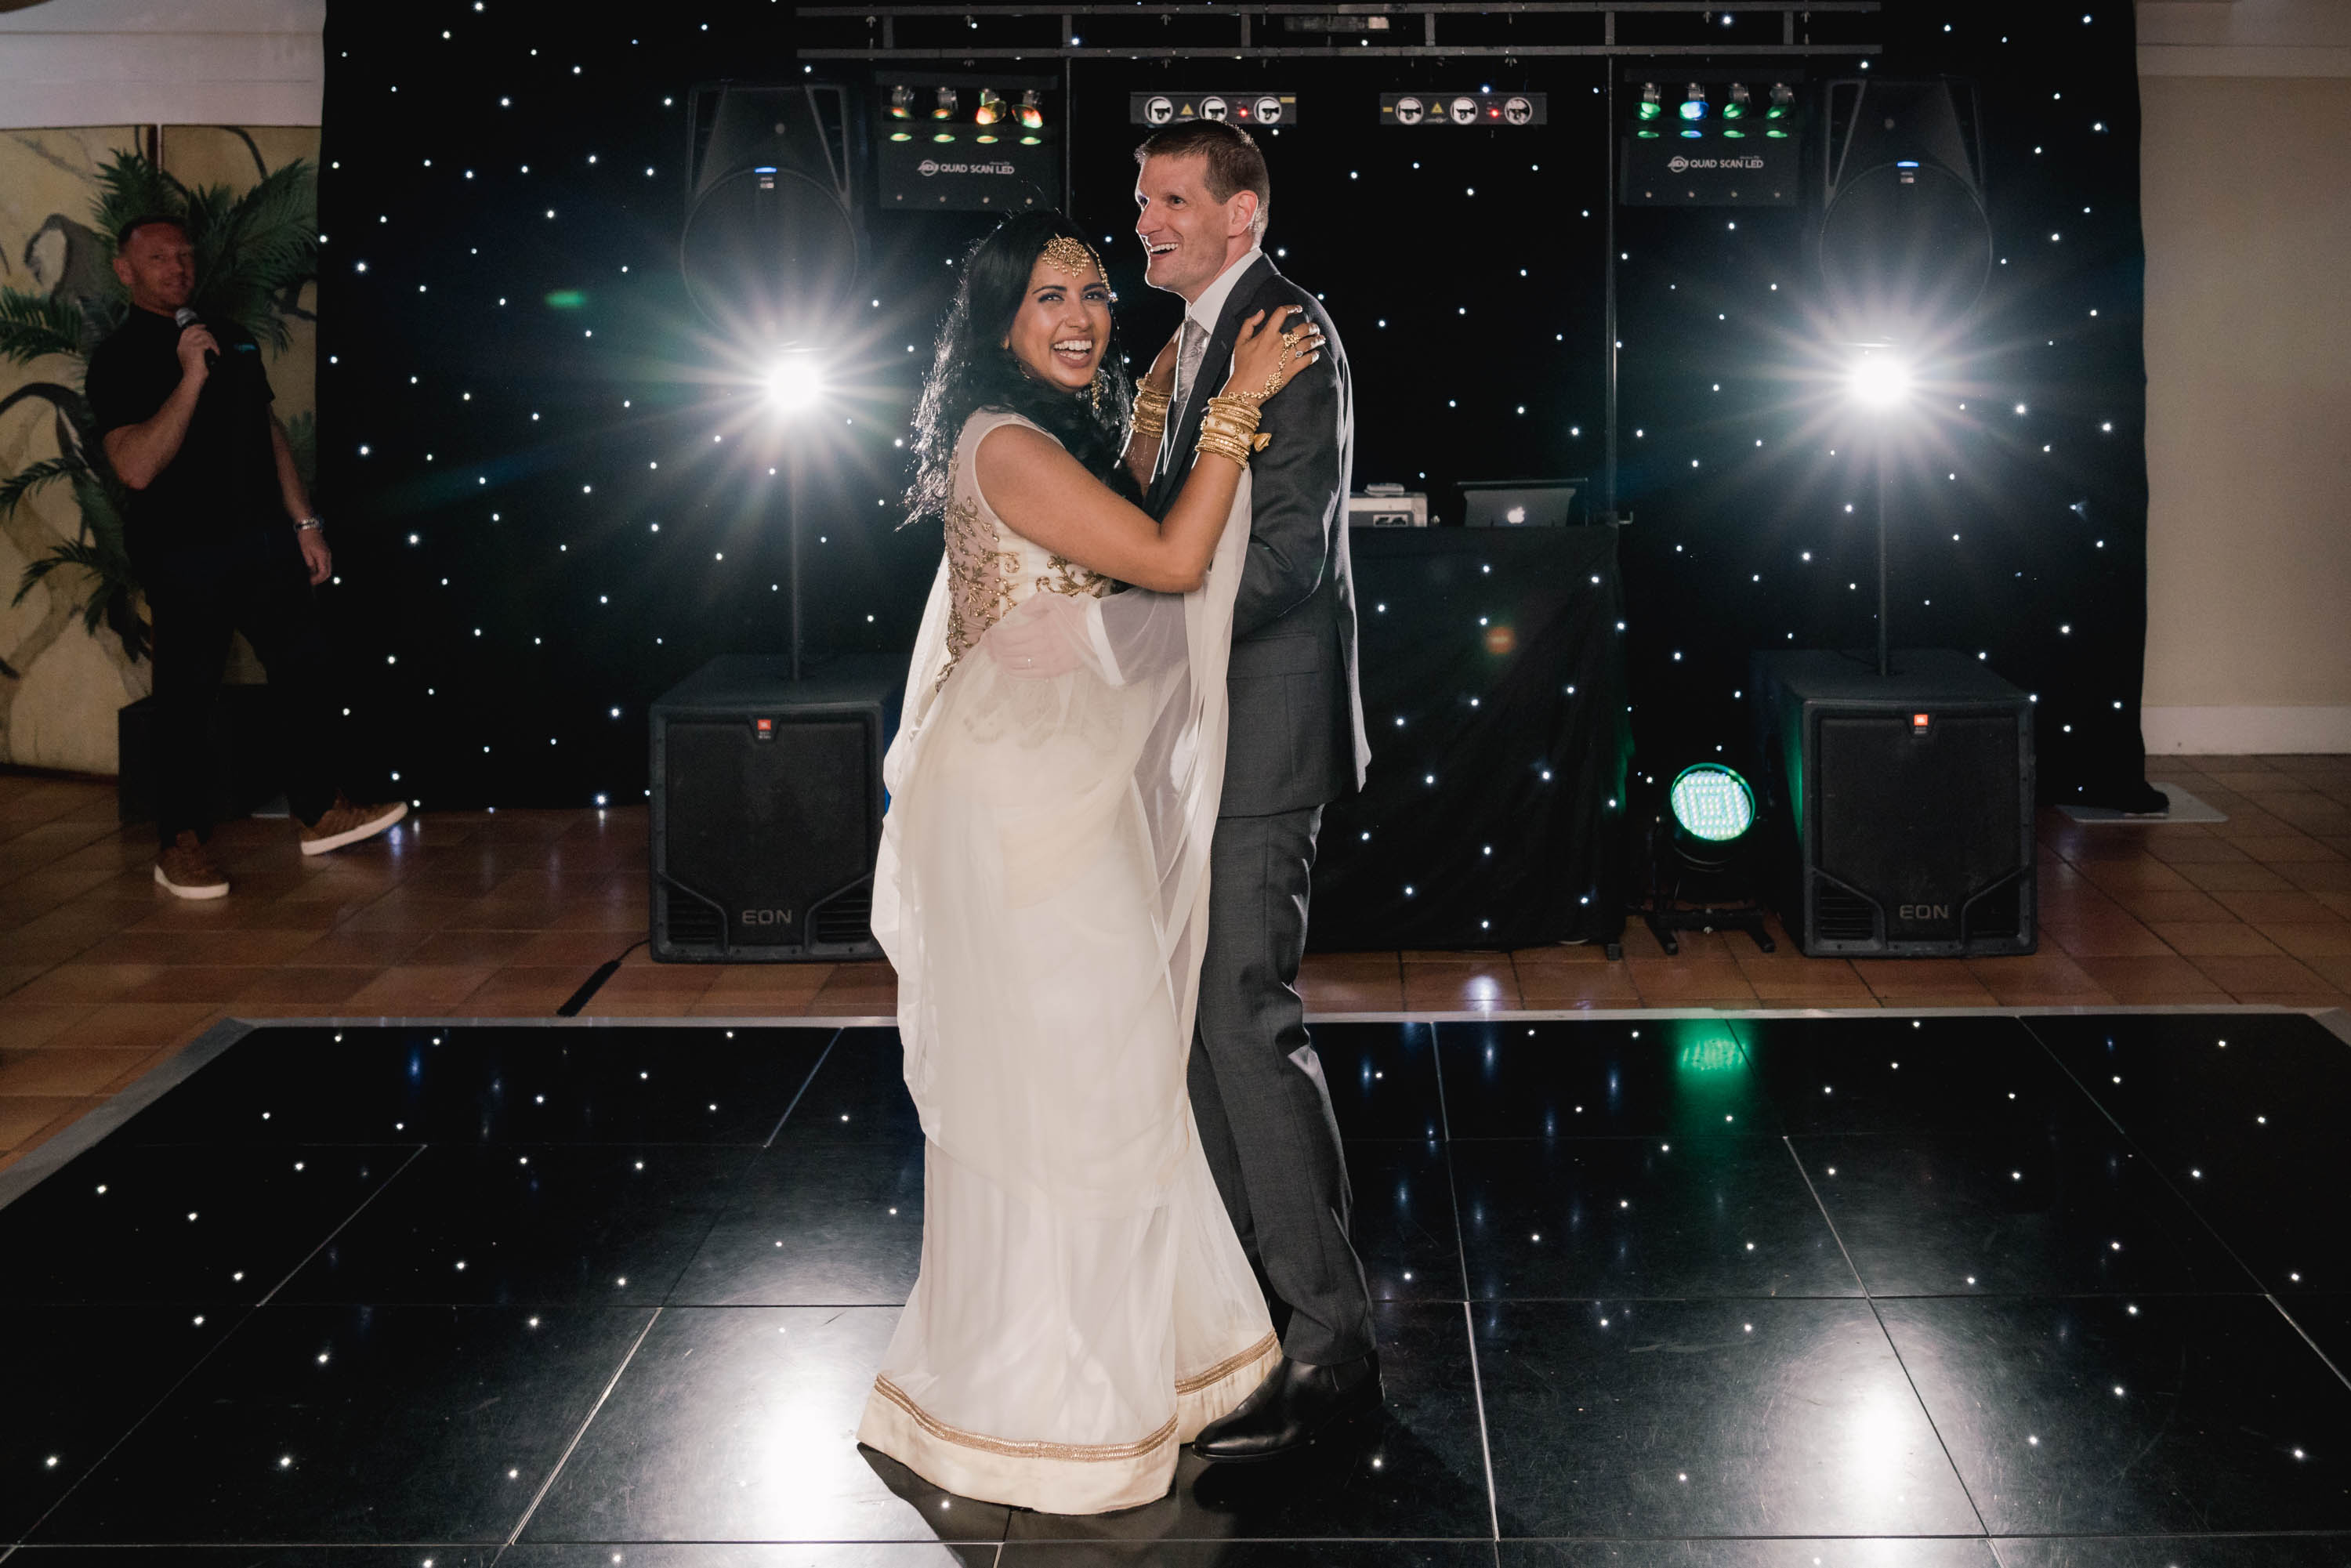 Bride and groom have their first dance together on their wedding day at Port Lympne Safari Park in Kent.